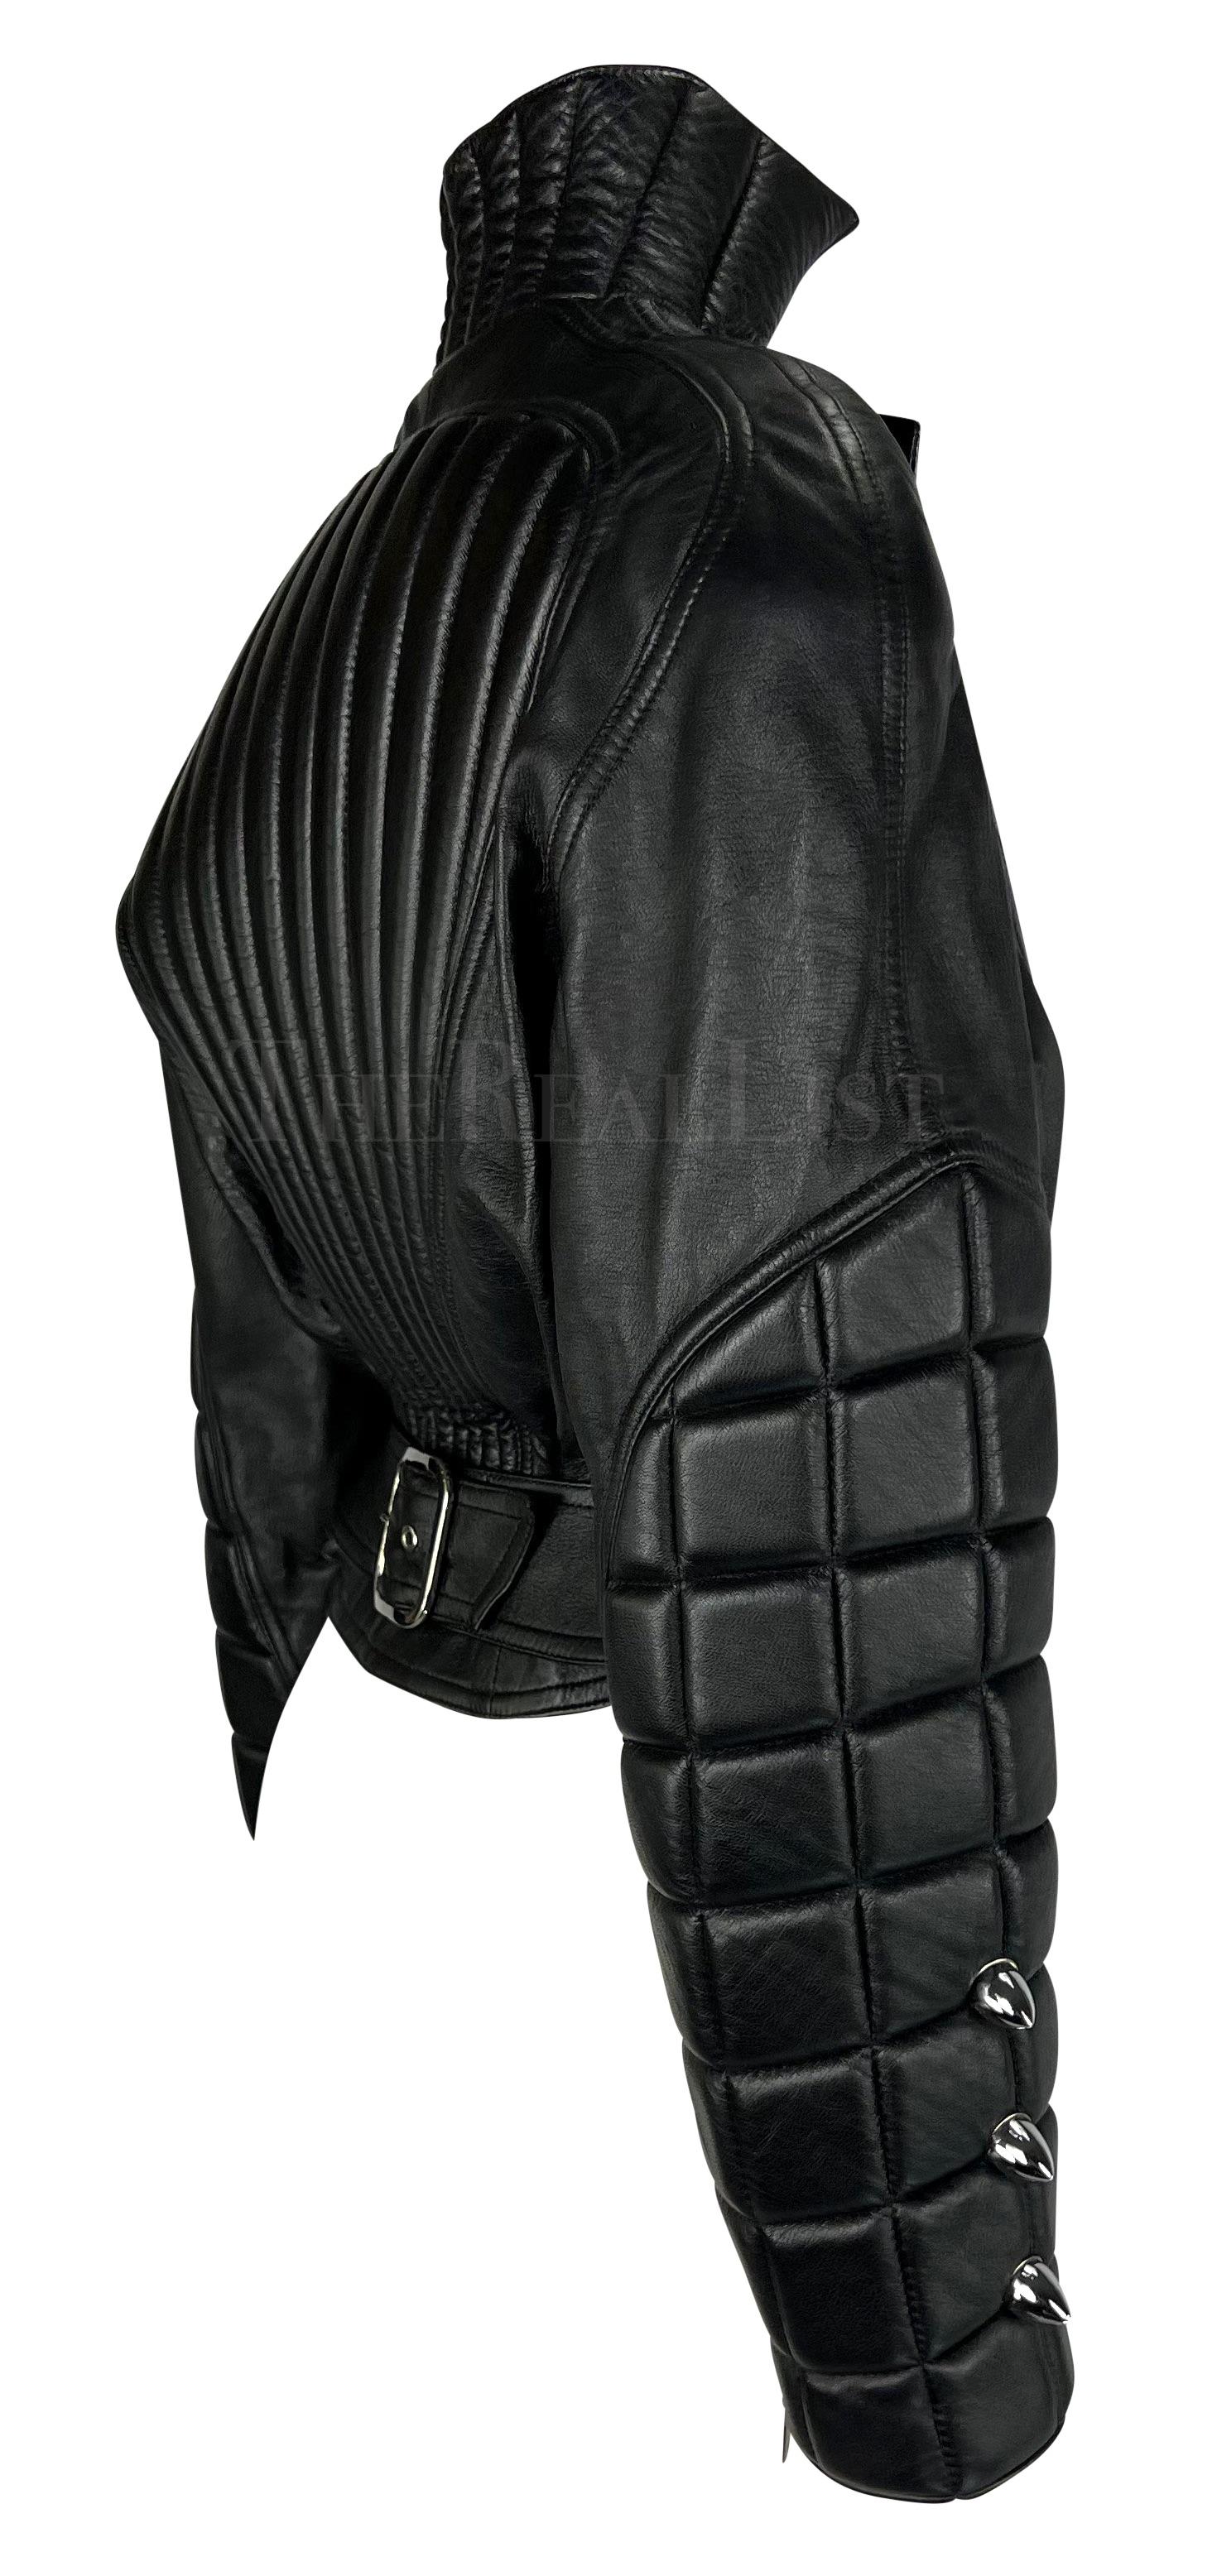 F/W 1989 Thierry Mugler Hiver Buick Sculptural Chrome Grille Leather Moto Jacket For Sale 5